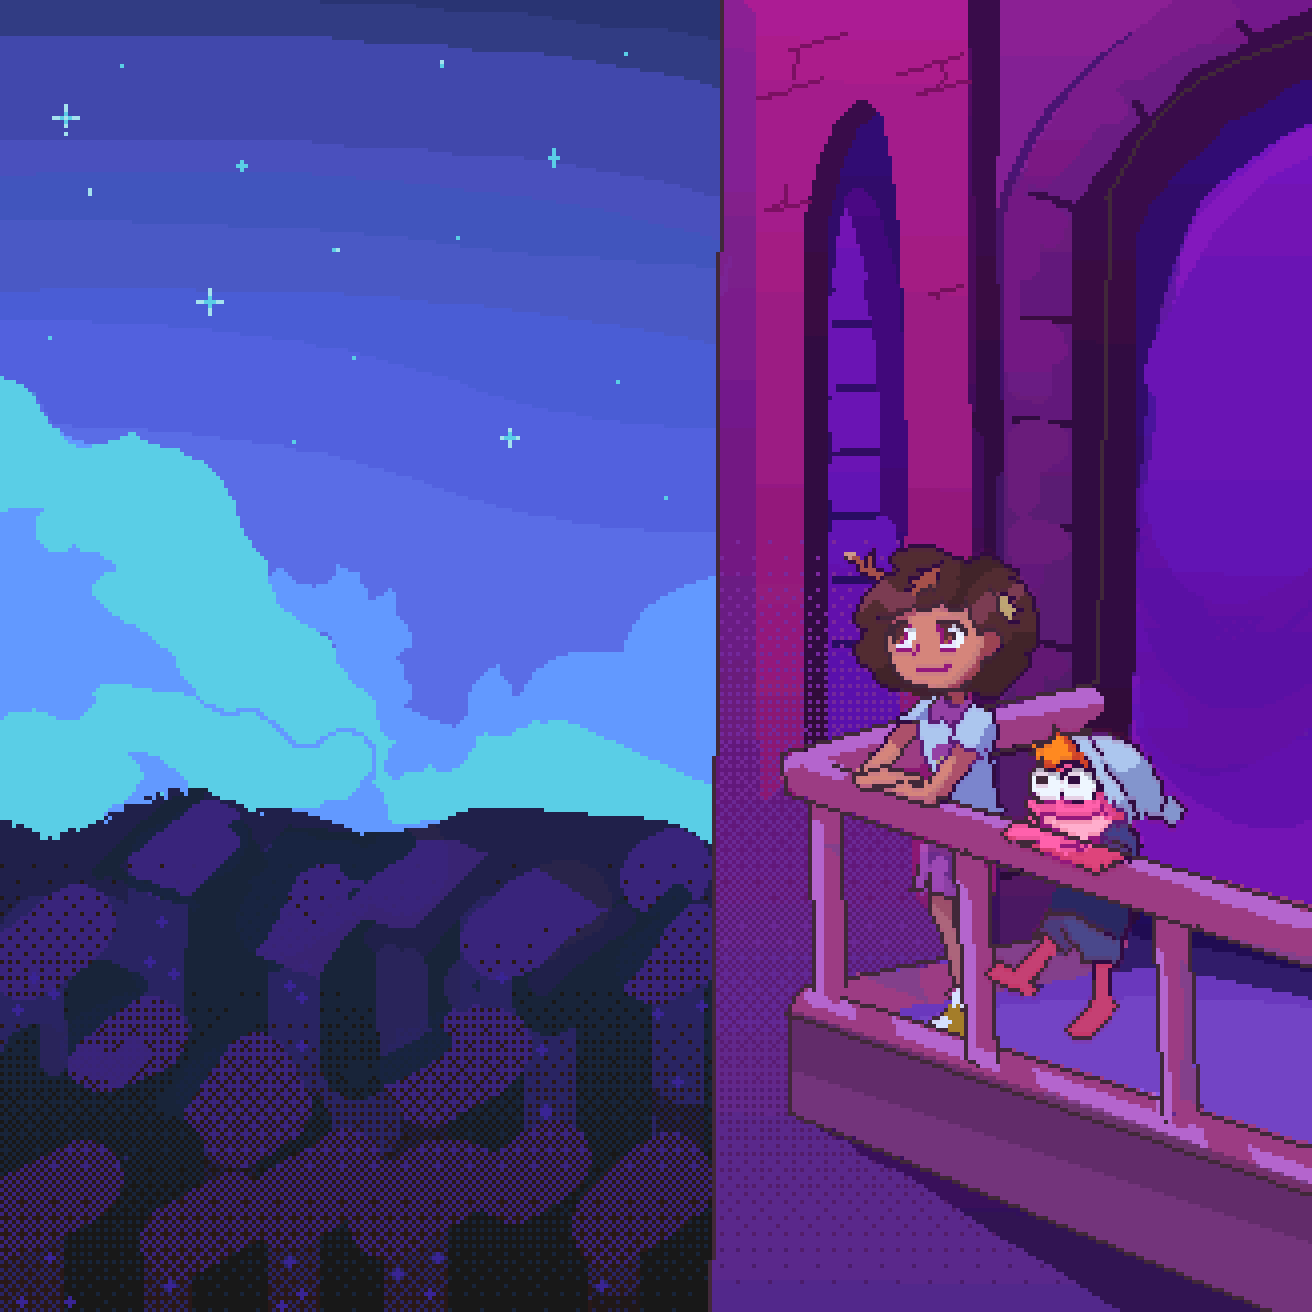 Sprig and Anne from Amphibia at the balcony